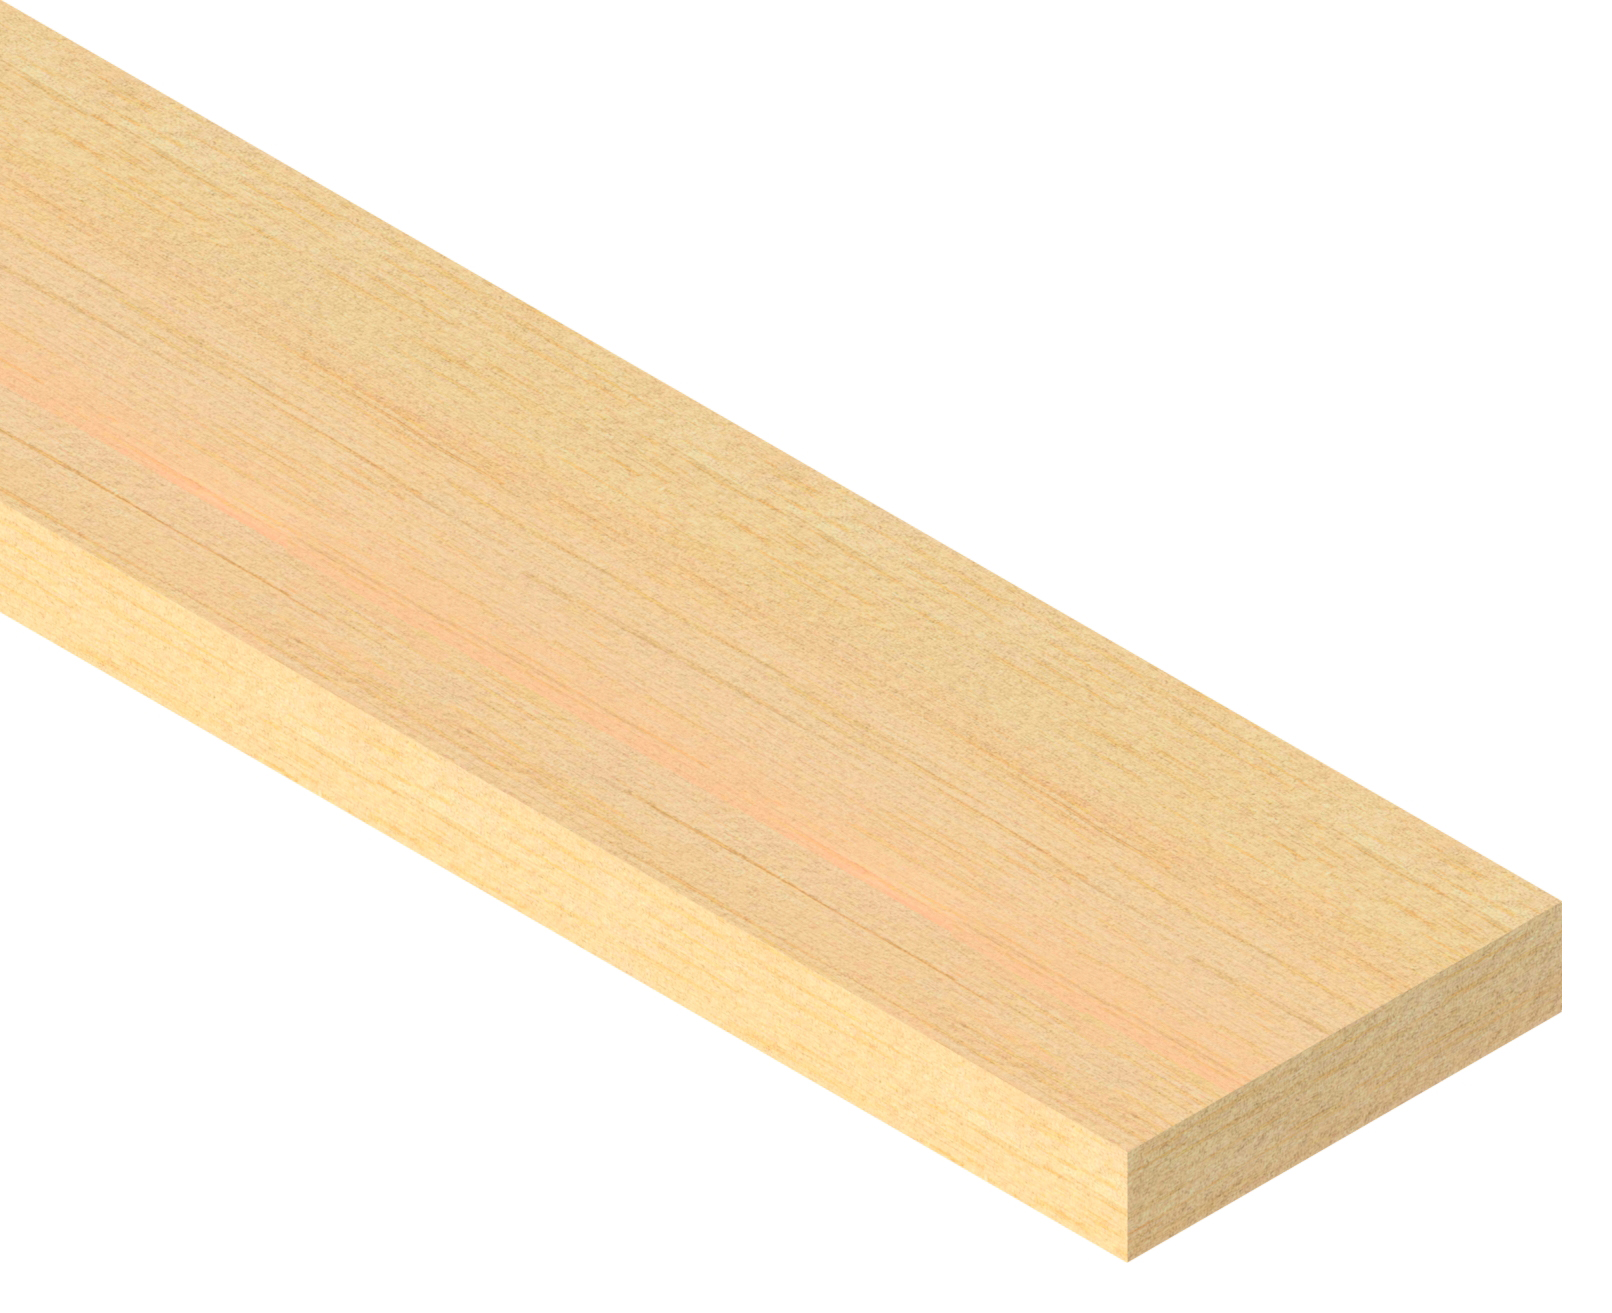 Image of Cheshire Mouldings Pine Stripwood - 15 x 68 x 900mm